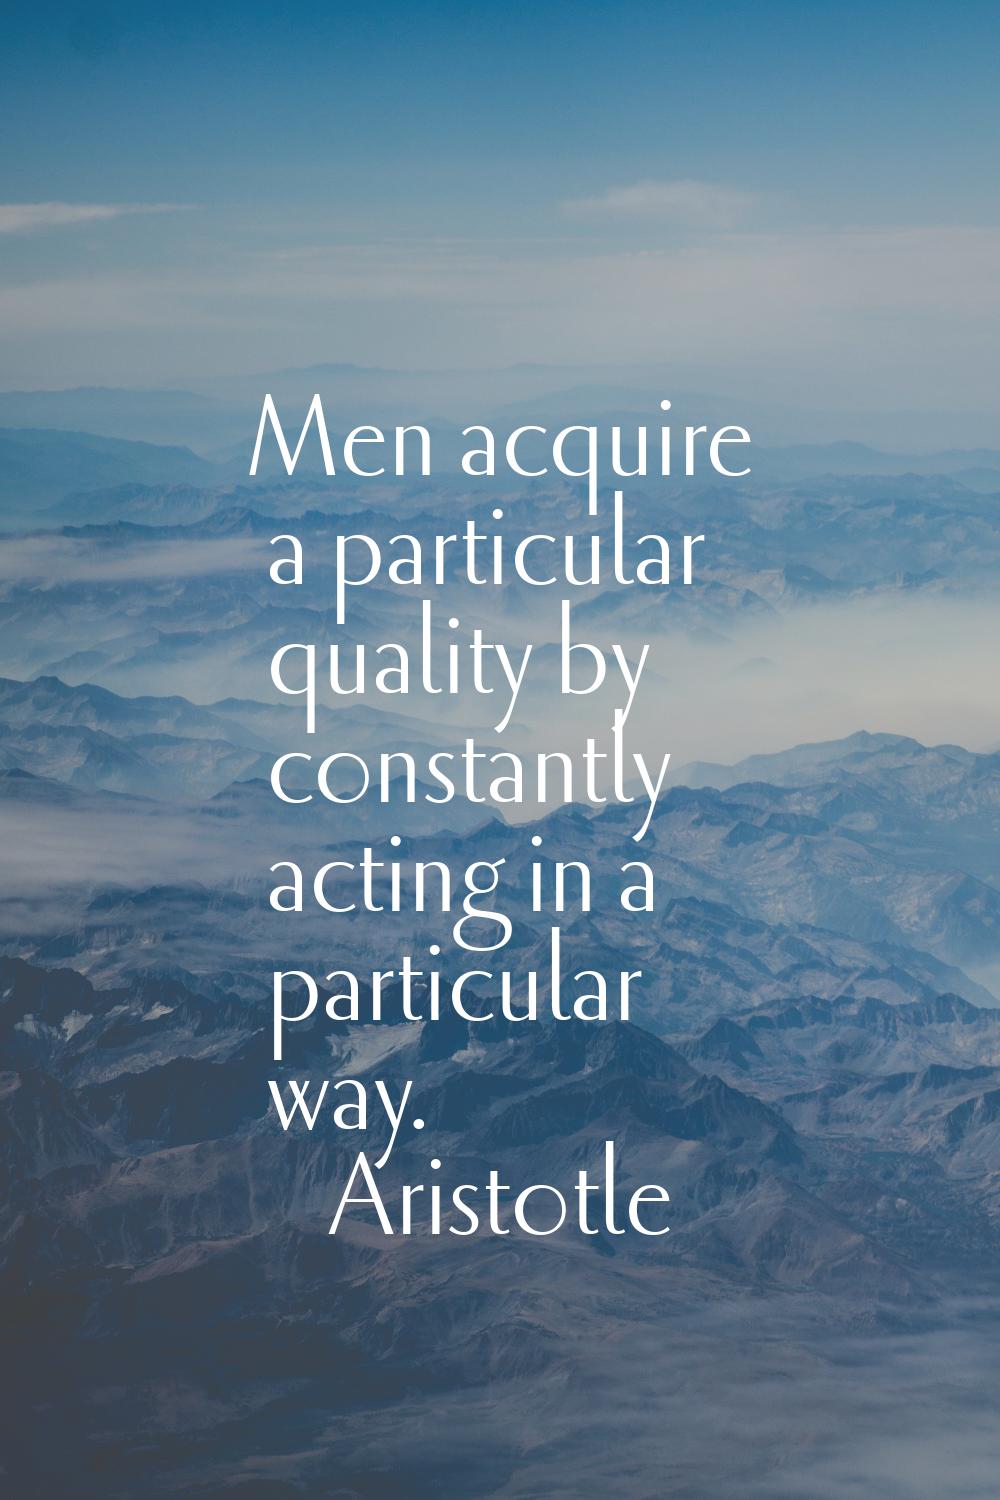 Men acquire a particular quality by constantly acting in a particular way.